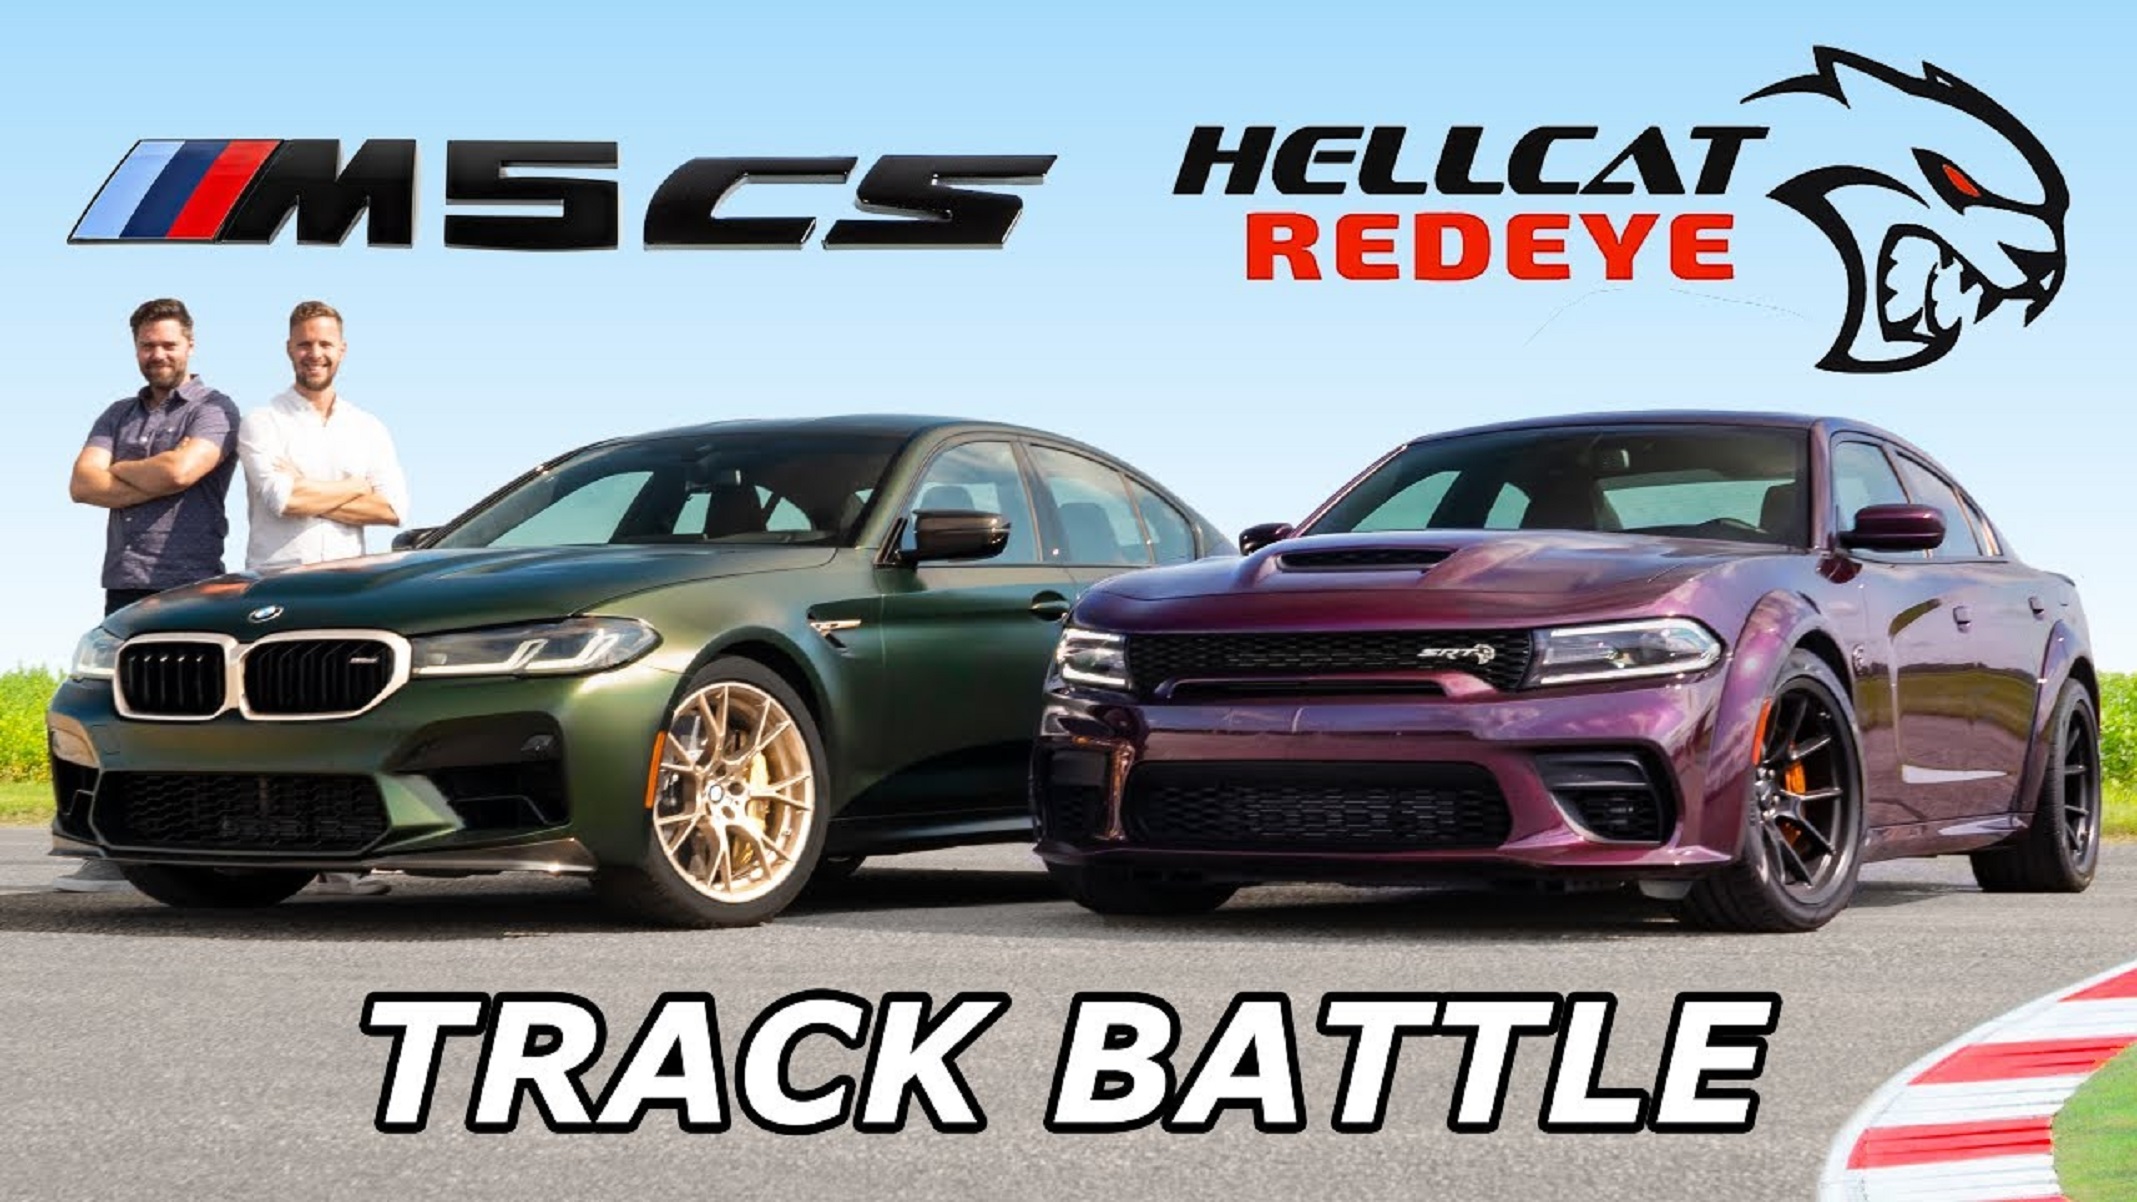 The Throttle House co-hosts next to a green 2022 BMW M5 CS and a purple 2021 Dodge Charger Hellcat Redeye Widebody on a racetrack